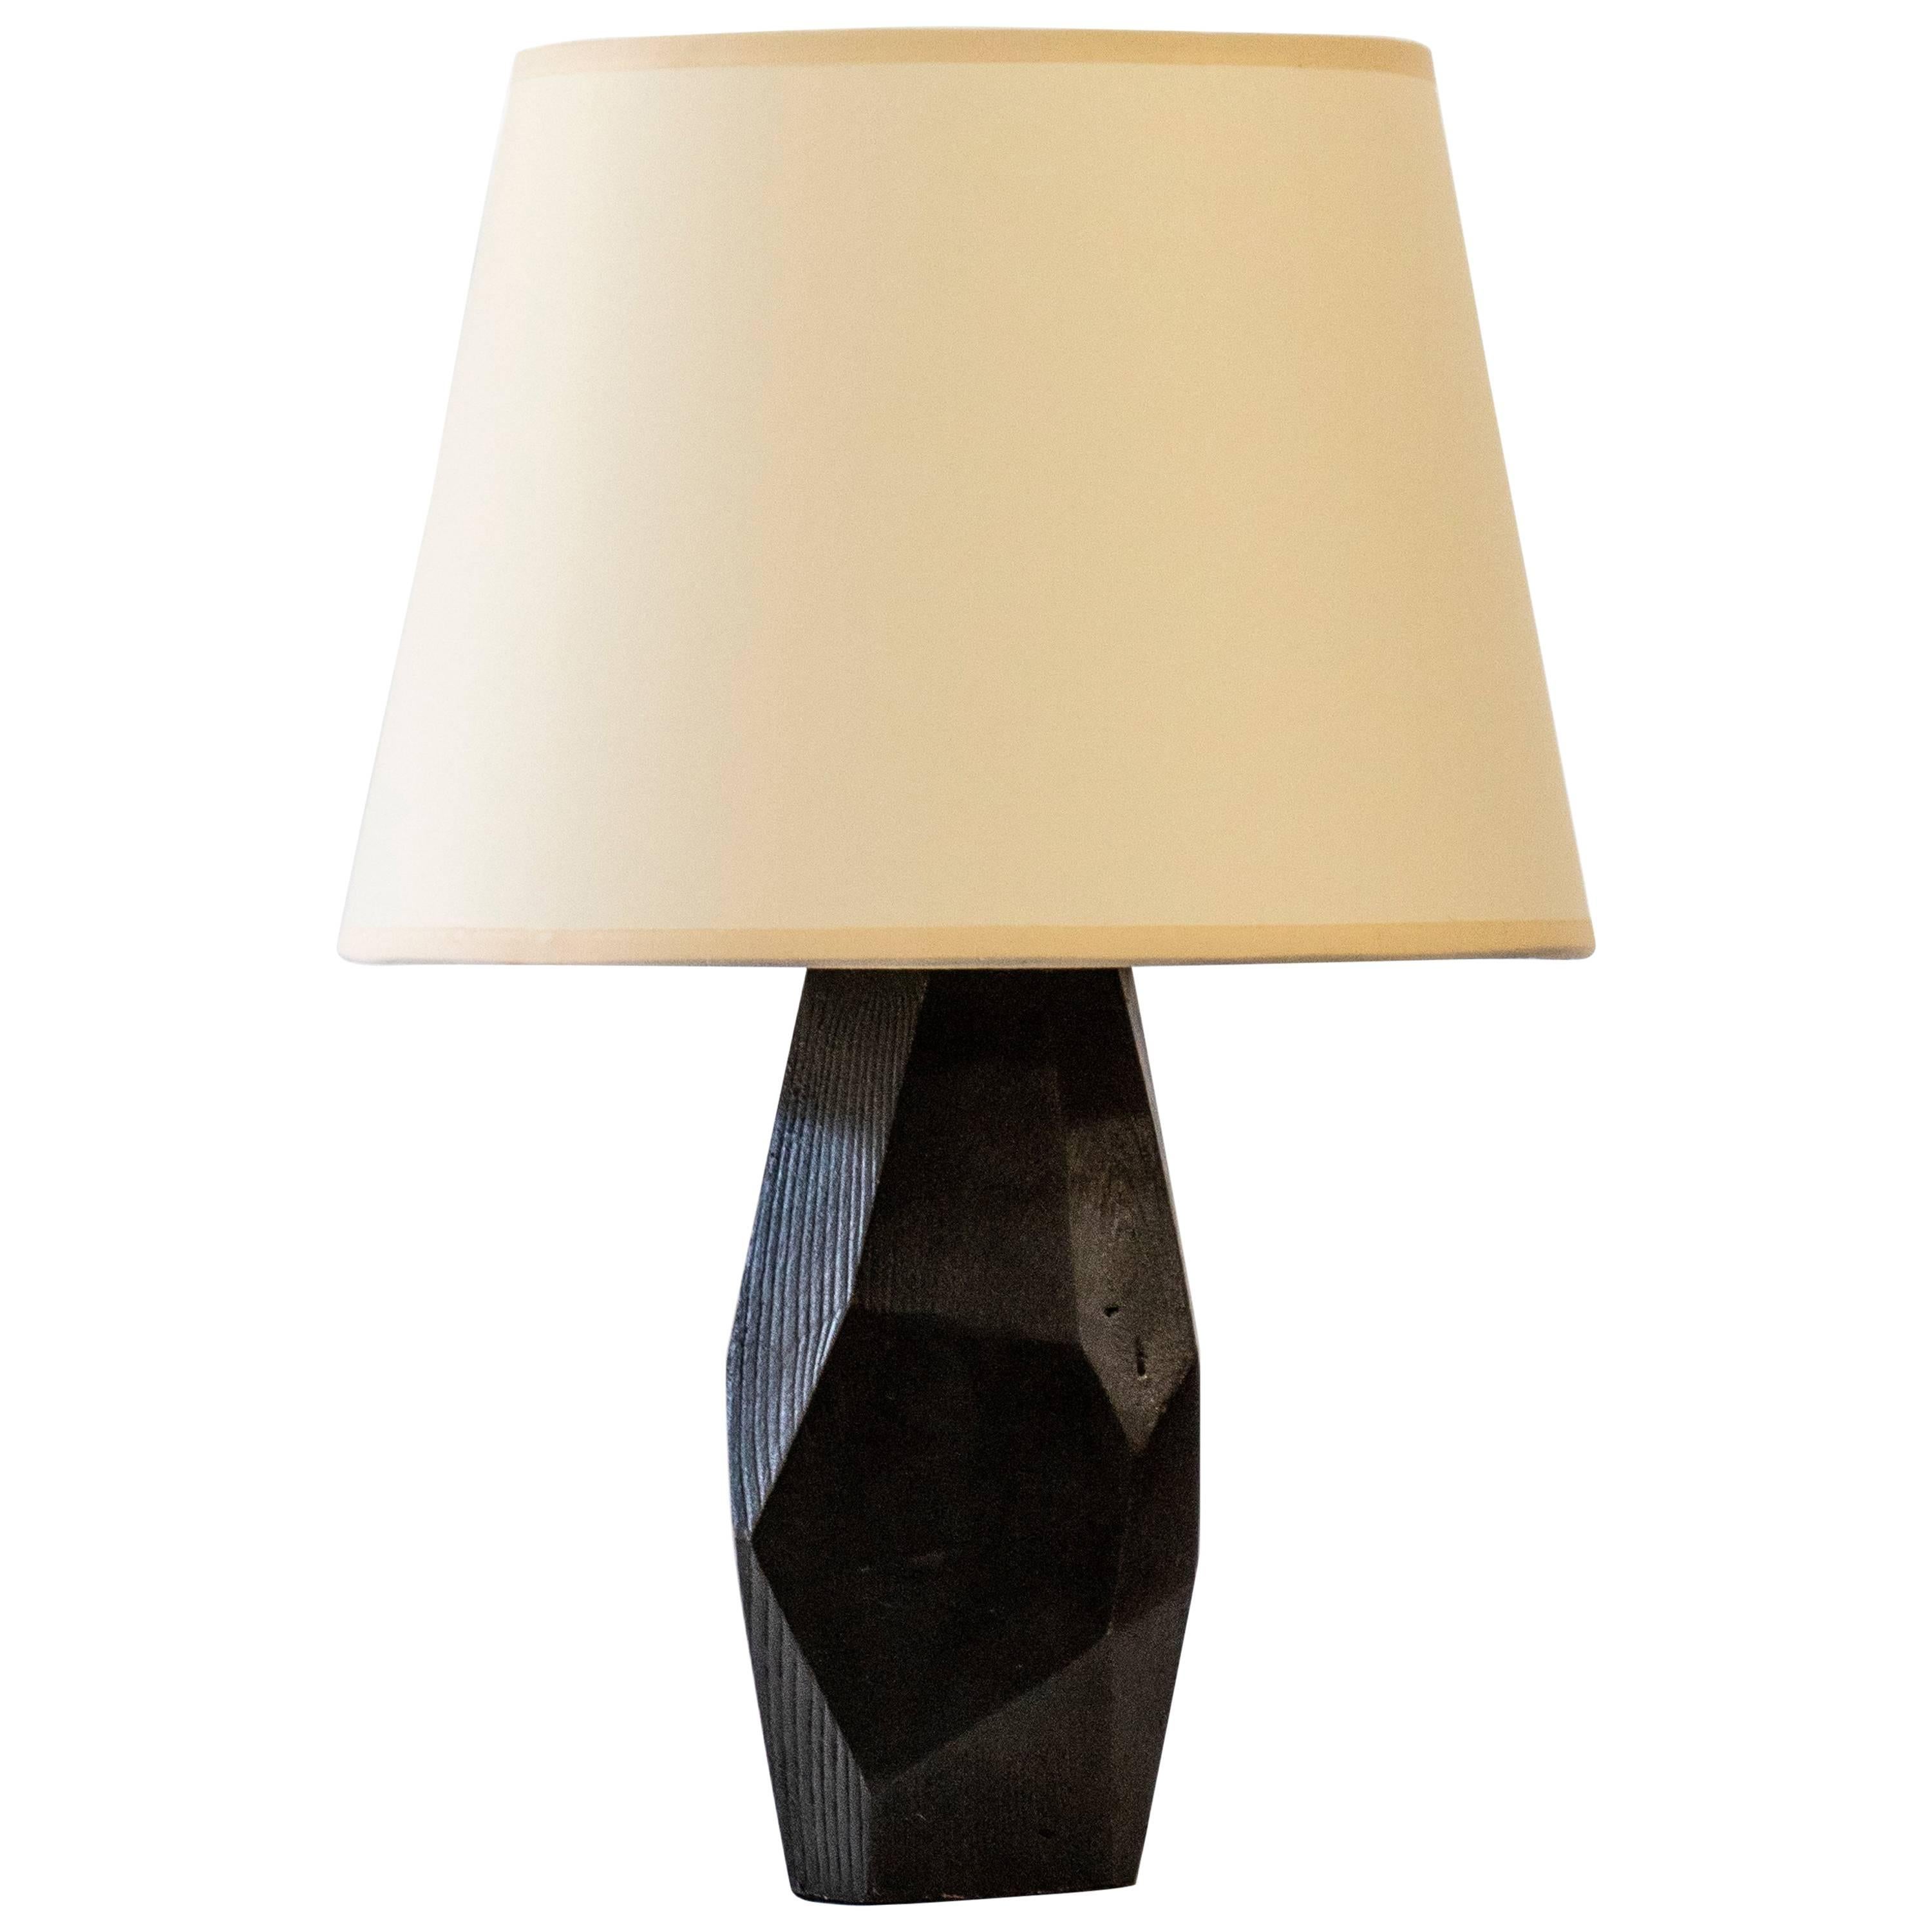 Table Lamp in Bronze by Jacques Jarrige "Nazca"